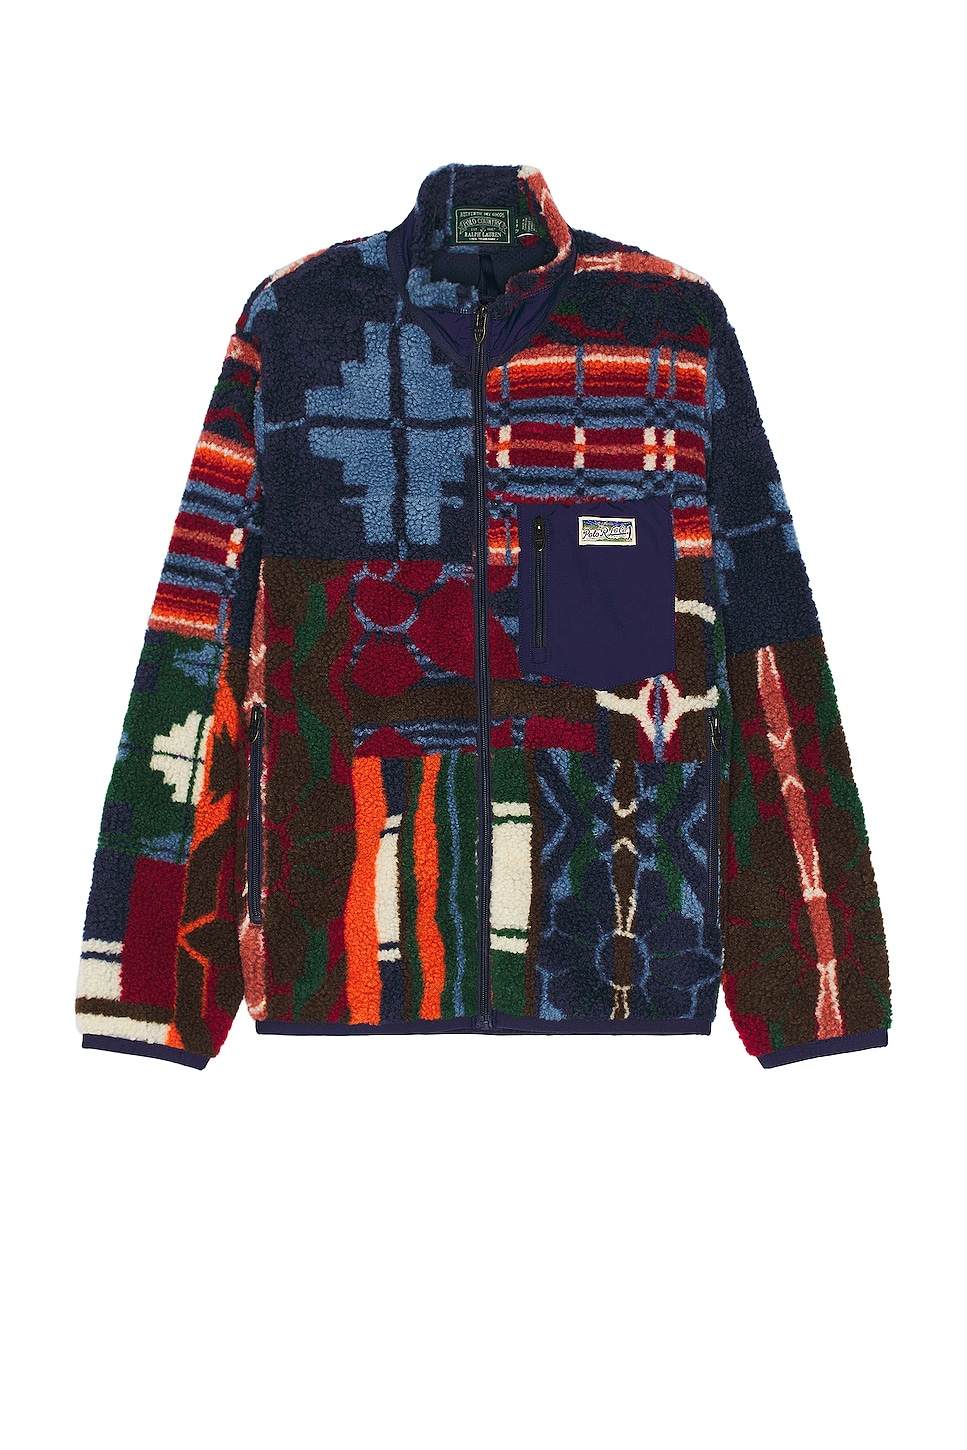 Image 1 of Polo Ralph Lauren Jacquard Sweater in Pinelodge Patchwork